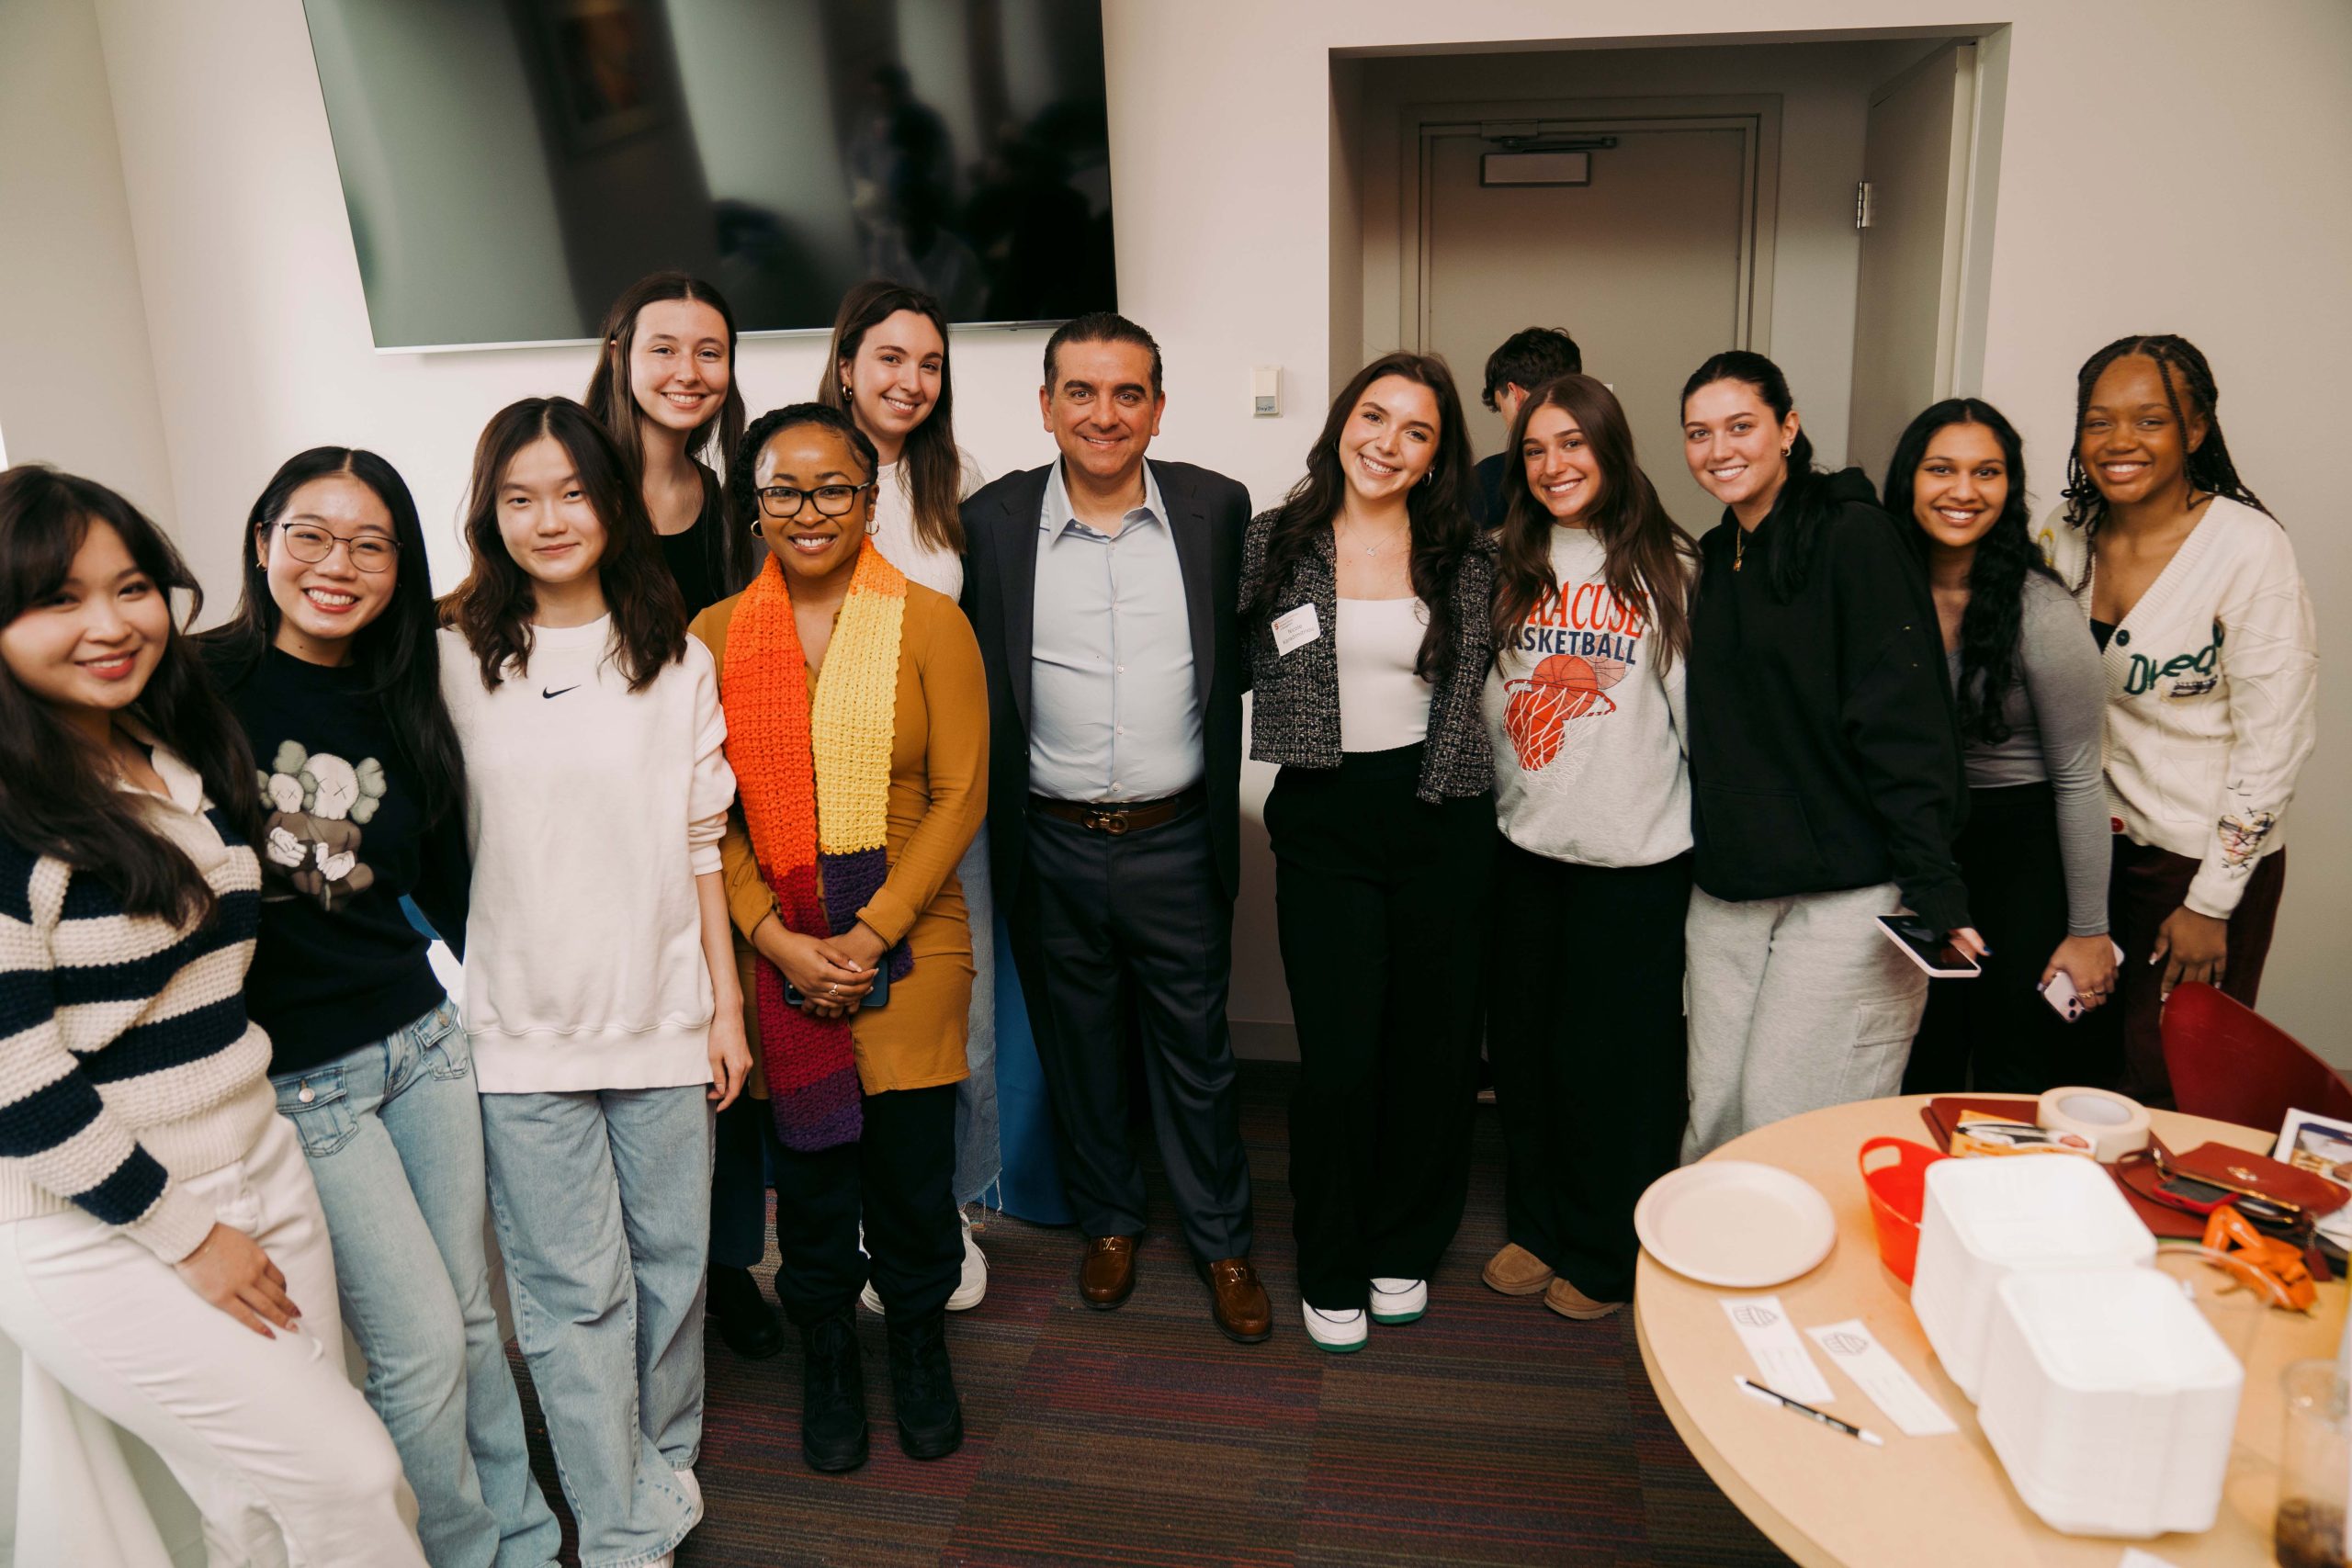 Group of students standing with Celebrity chef and “Cake Boss” Buddy Valastro